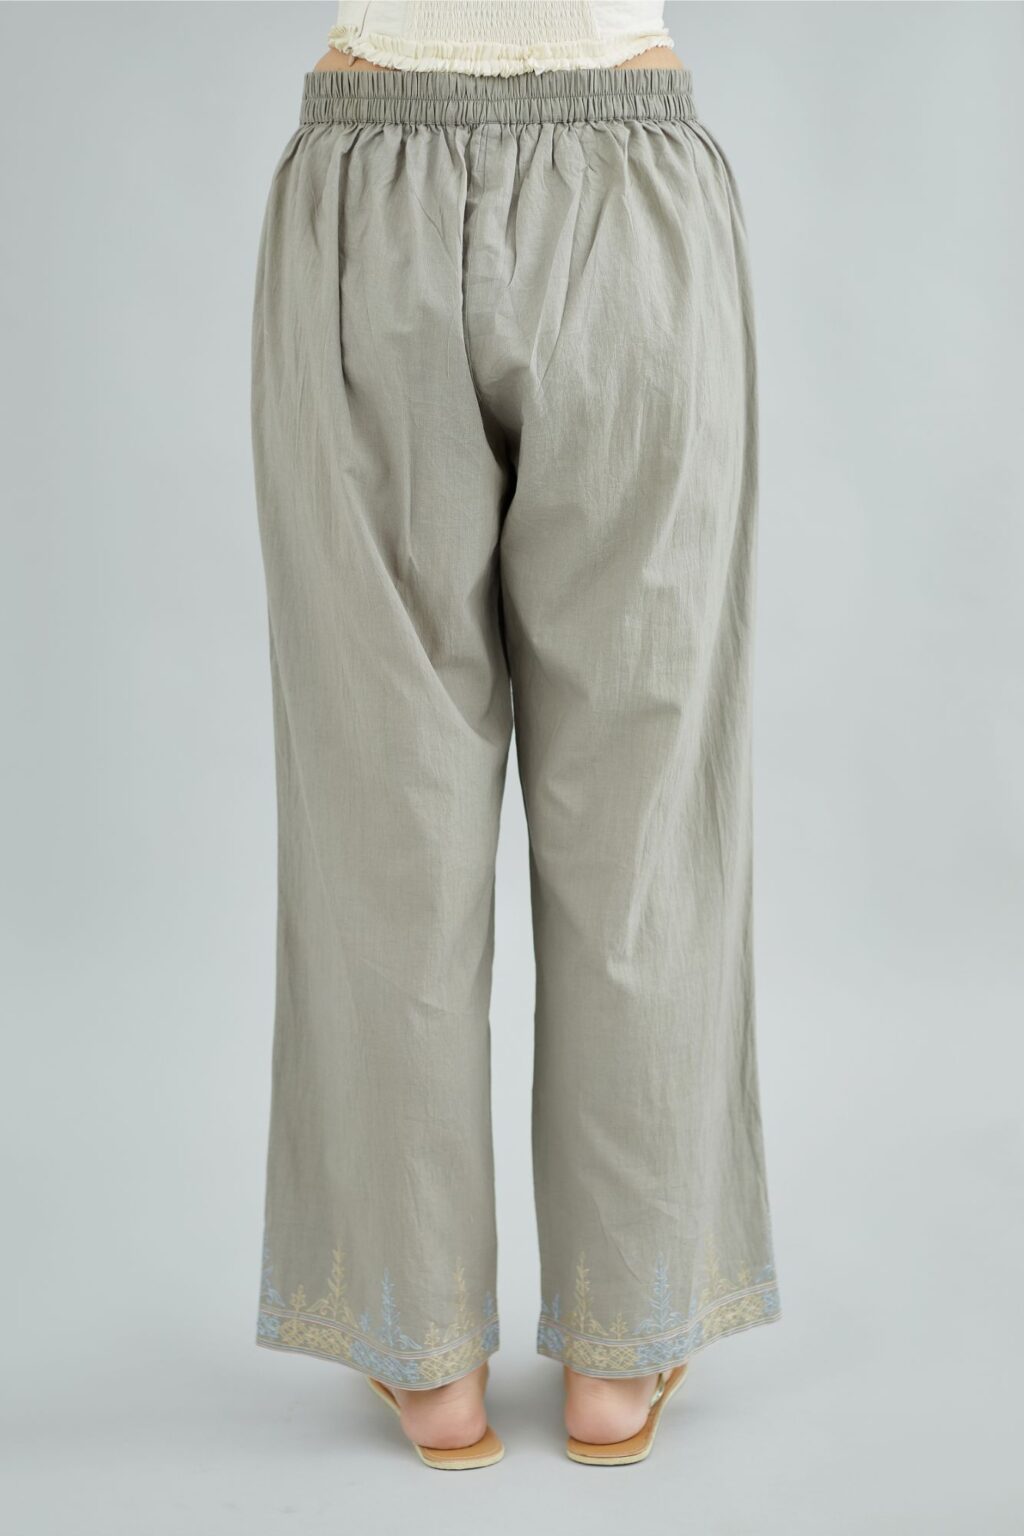 Cool grey straight cotton pants with thread embroidery at bottom hem